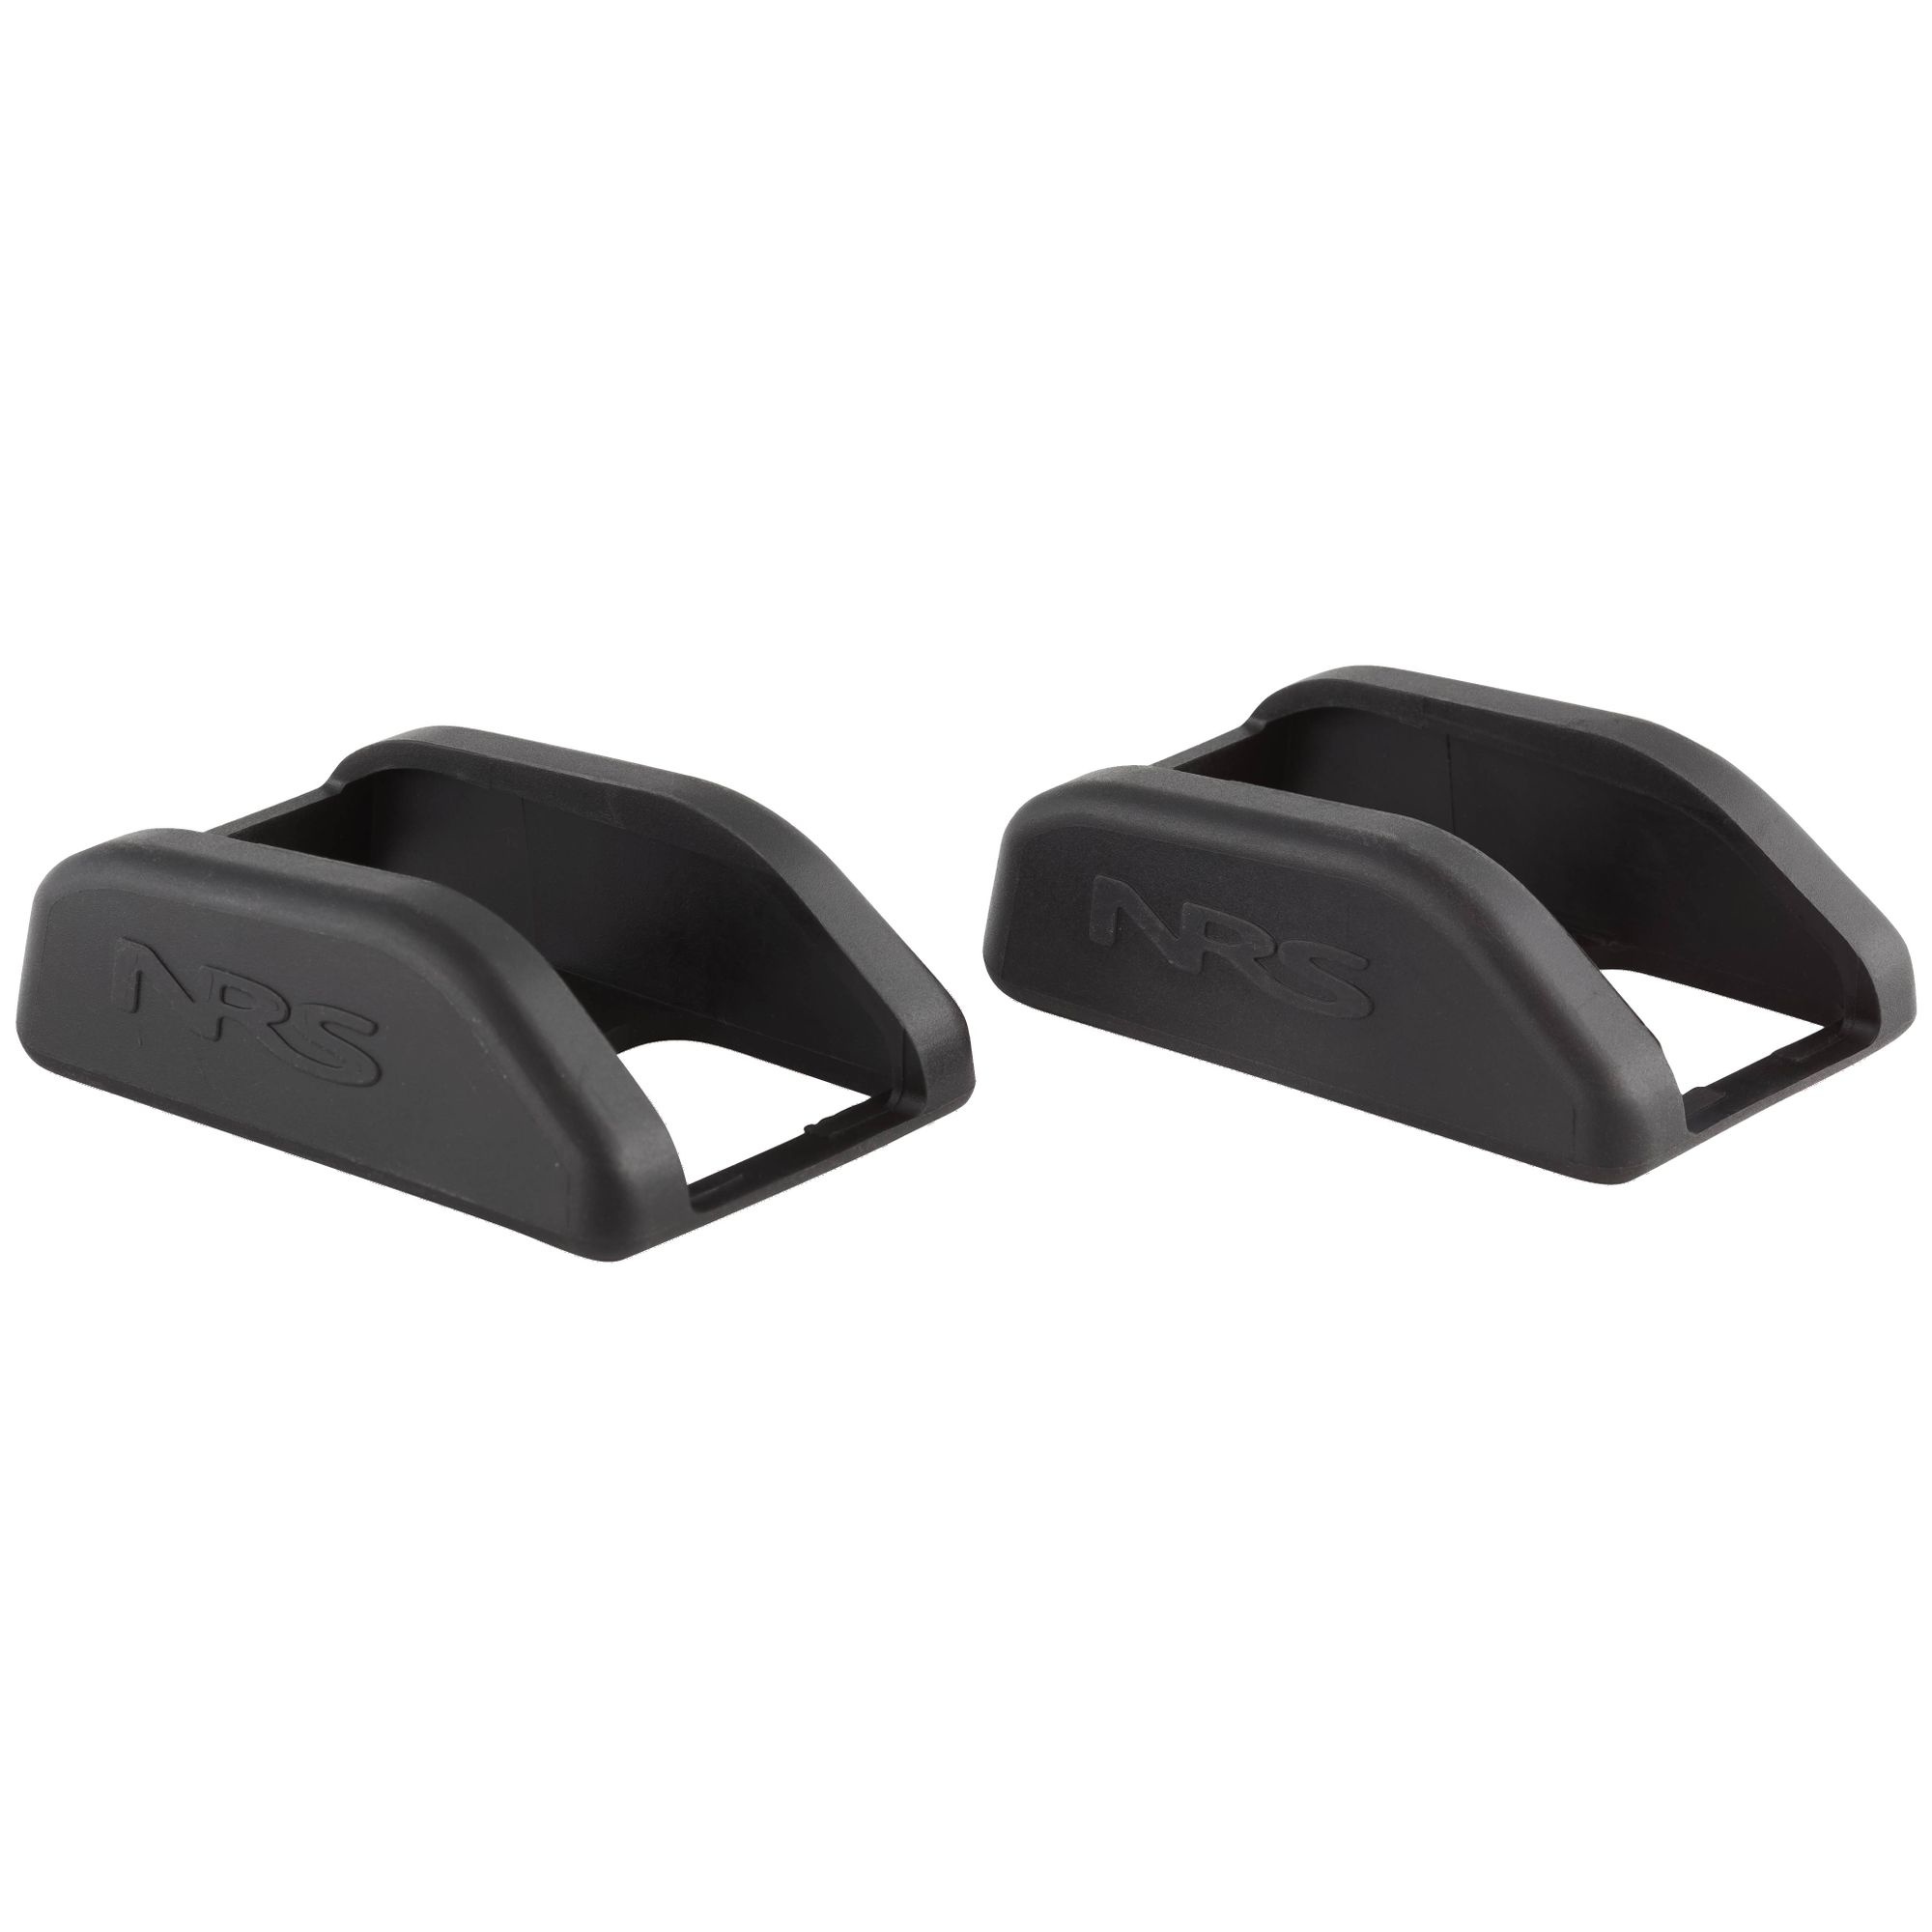 NRS NRS Buckle Bumpers for 1" Cam Straps - Pair